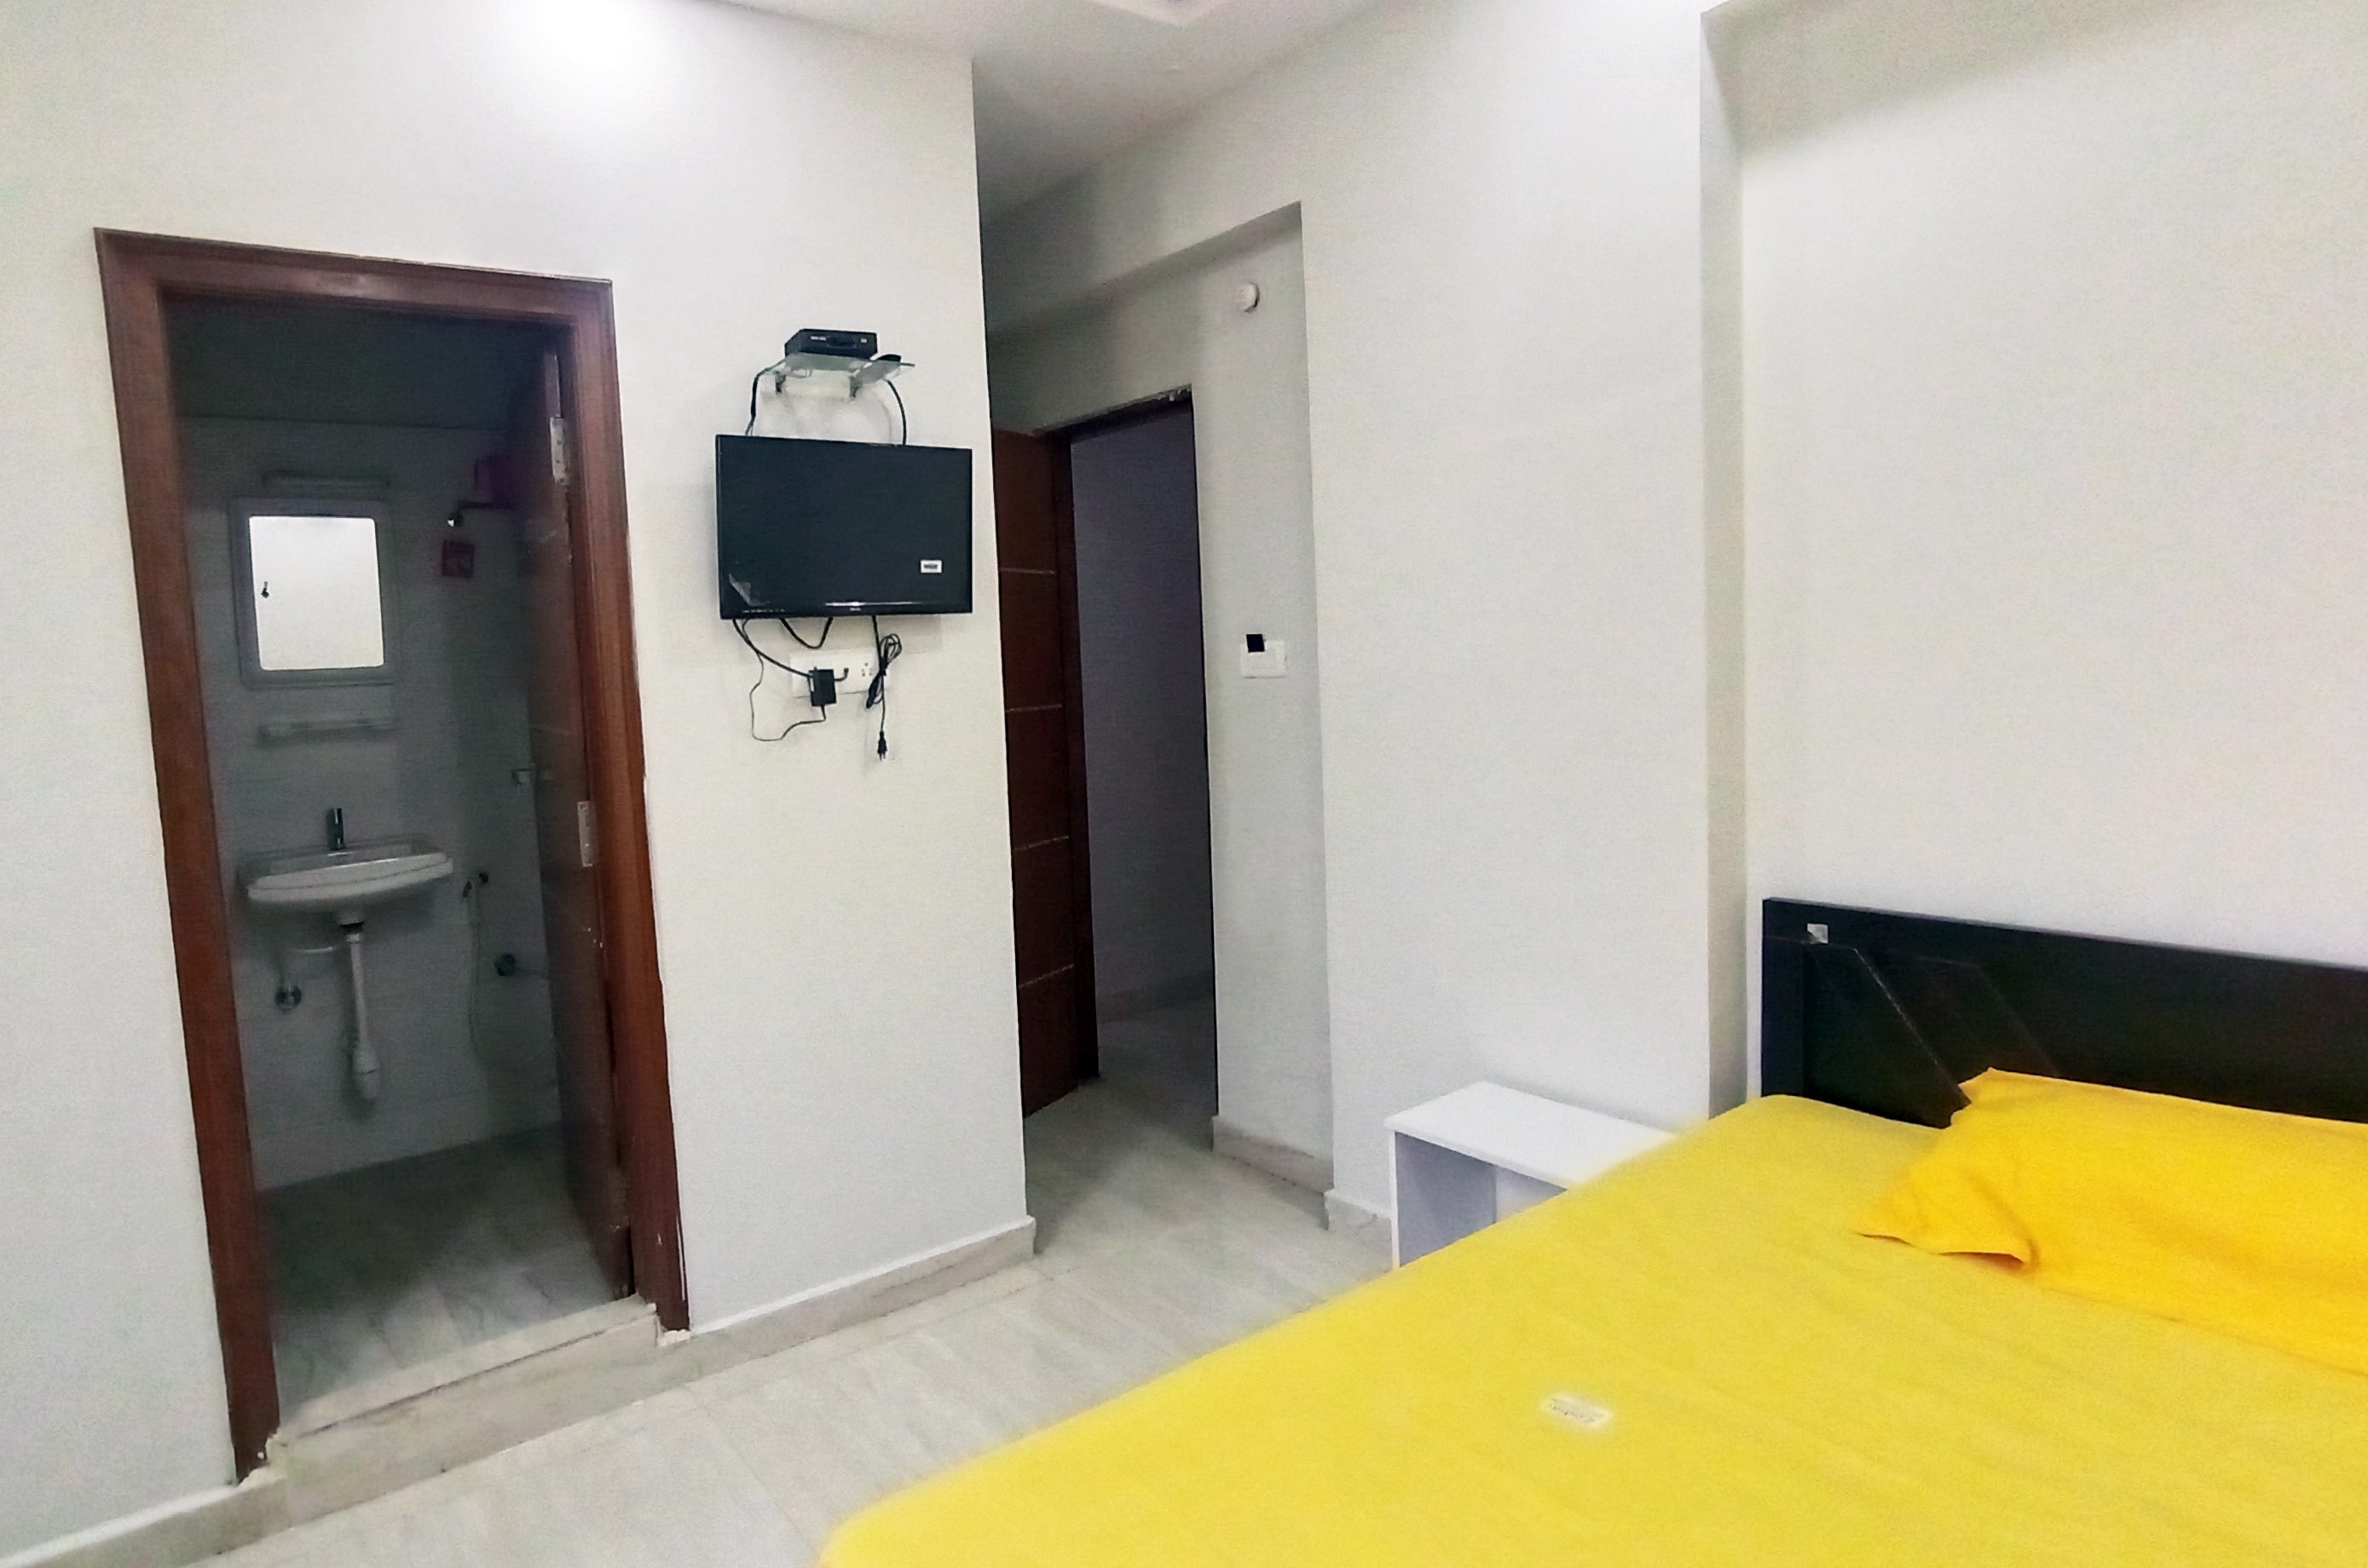 A typical bedroom in Jonas Hall student housing in Bengaluru, India.